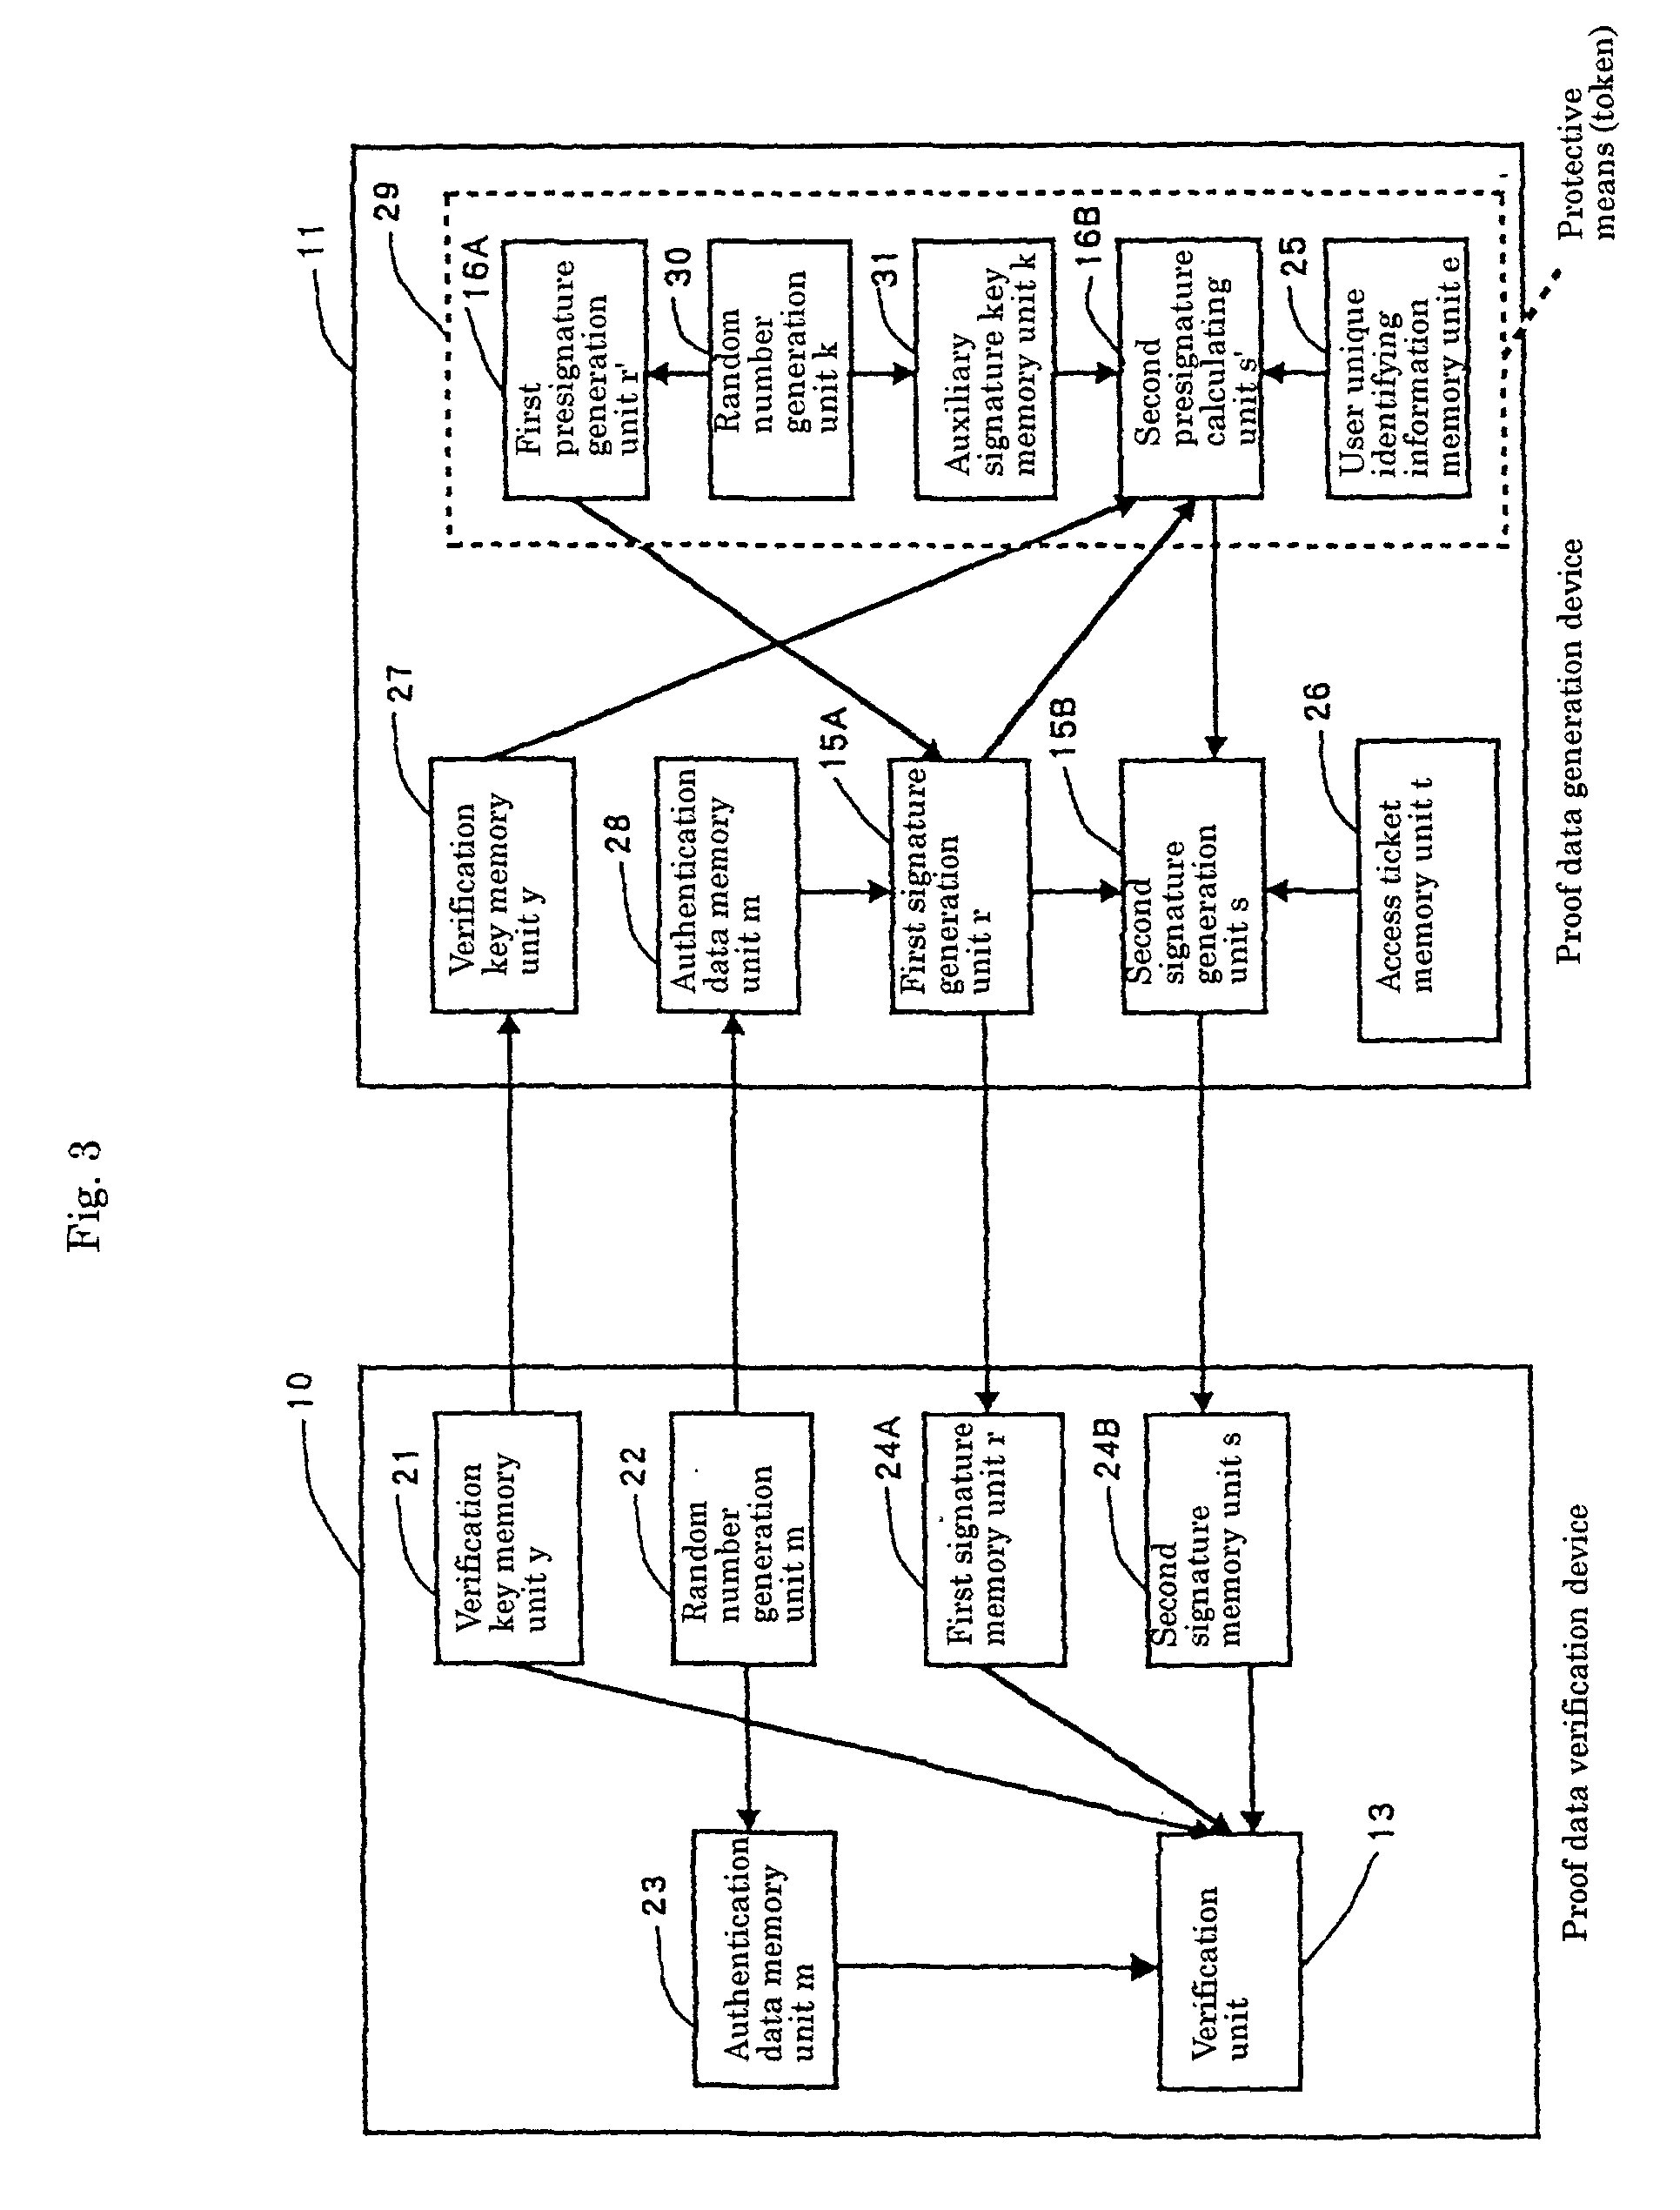 Device and method for authenticating user's access rights to resources